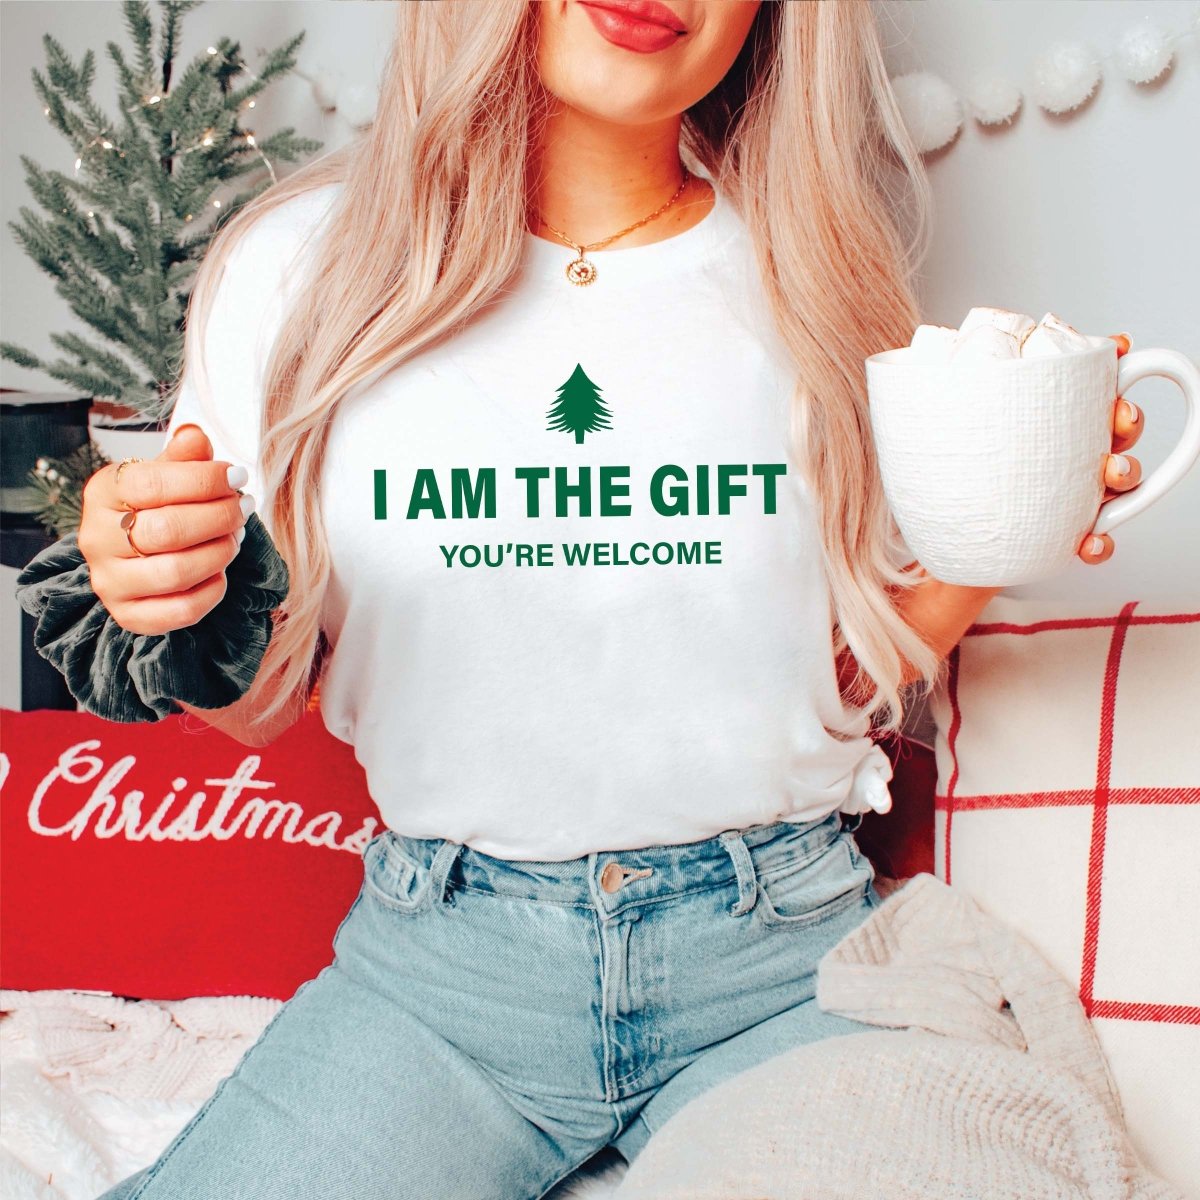 I am the gift Bella Graphic Wholesale Tee - Limeberry Designs